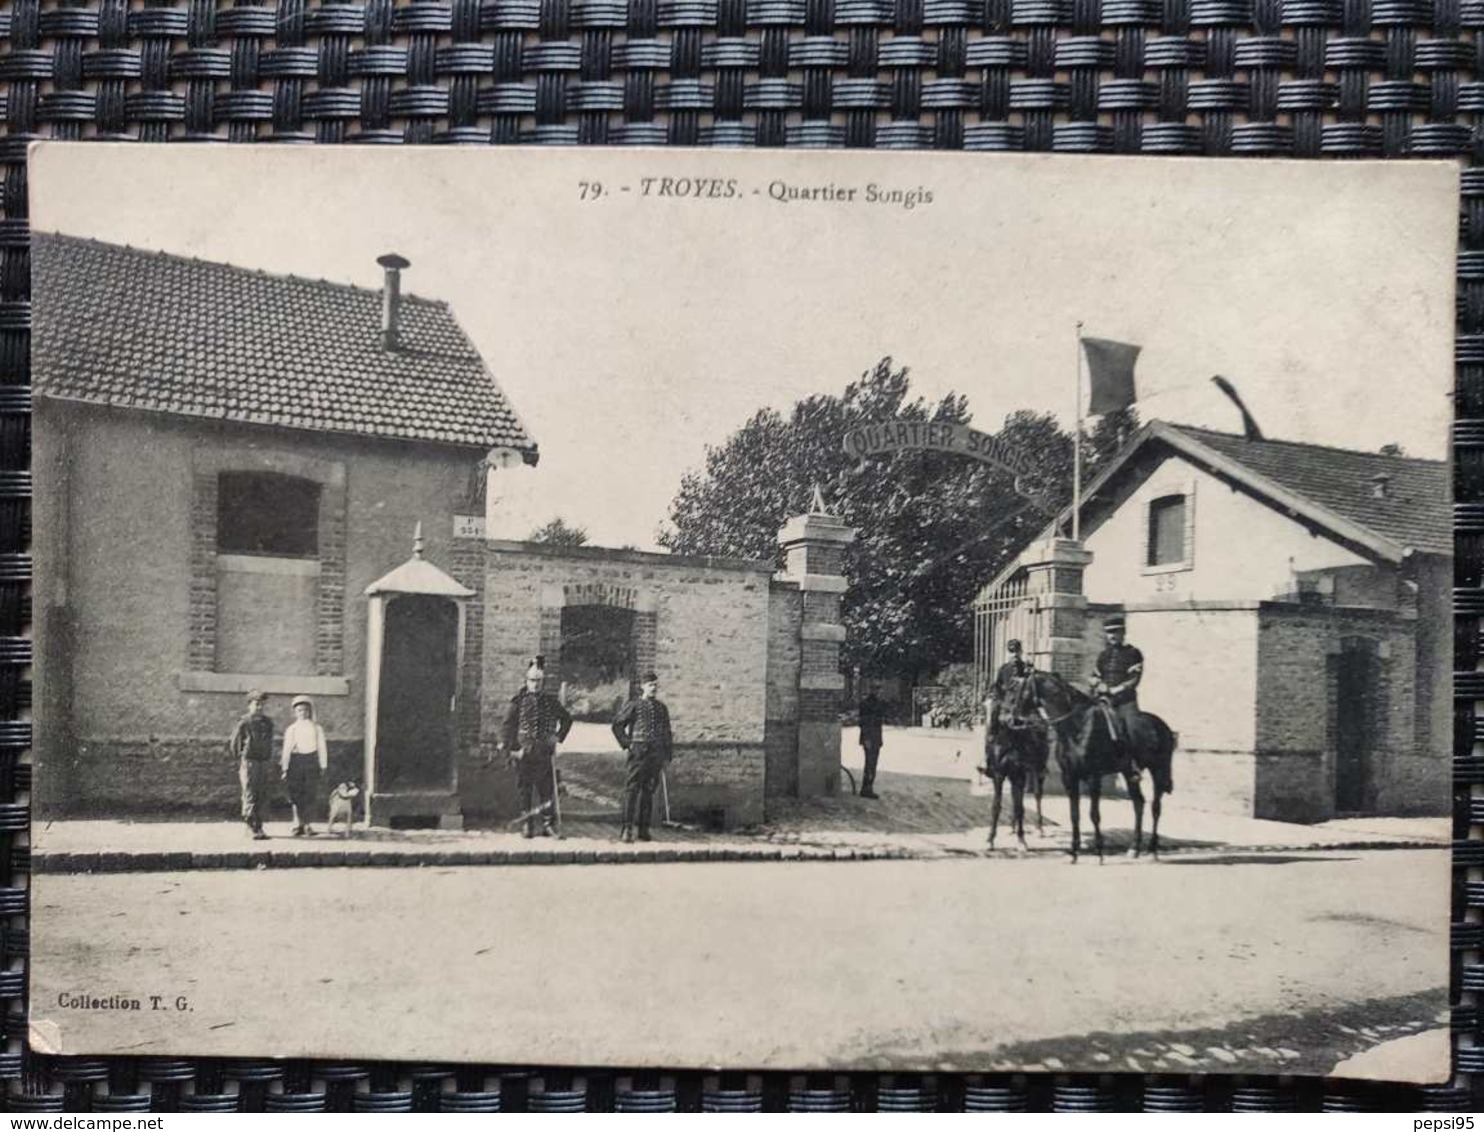 10 Aube - TROYES Quartier Songis (Collection T. G., N° 79) - Troyes